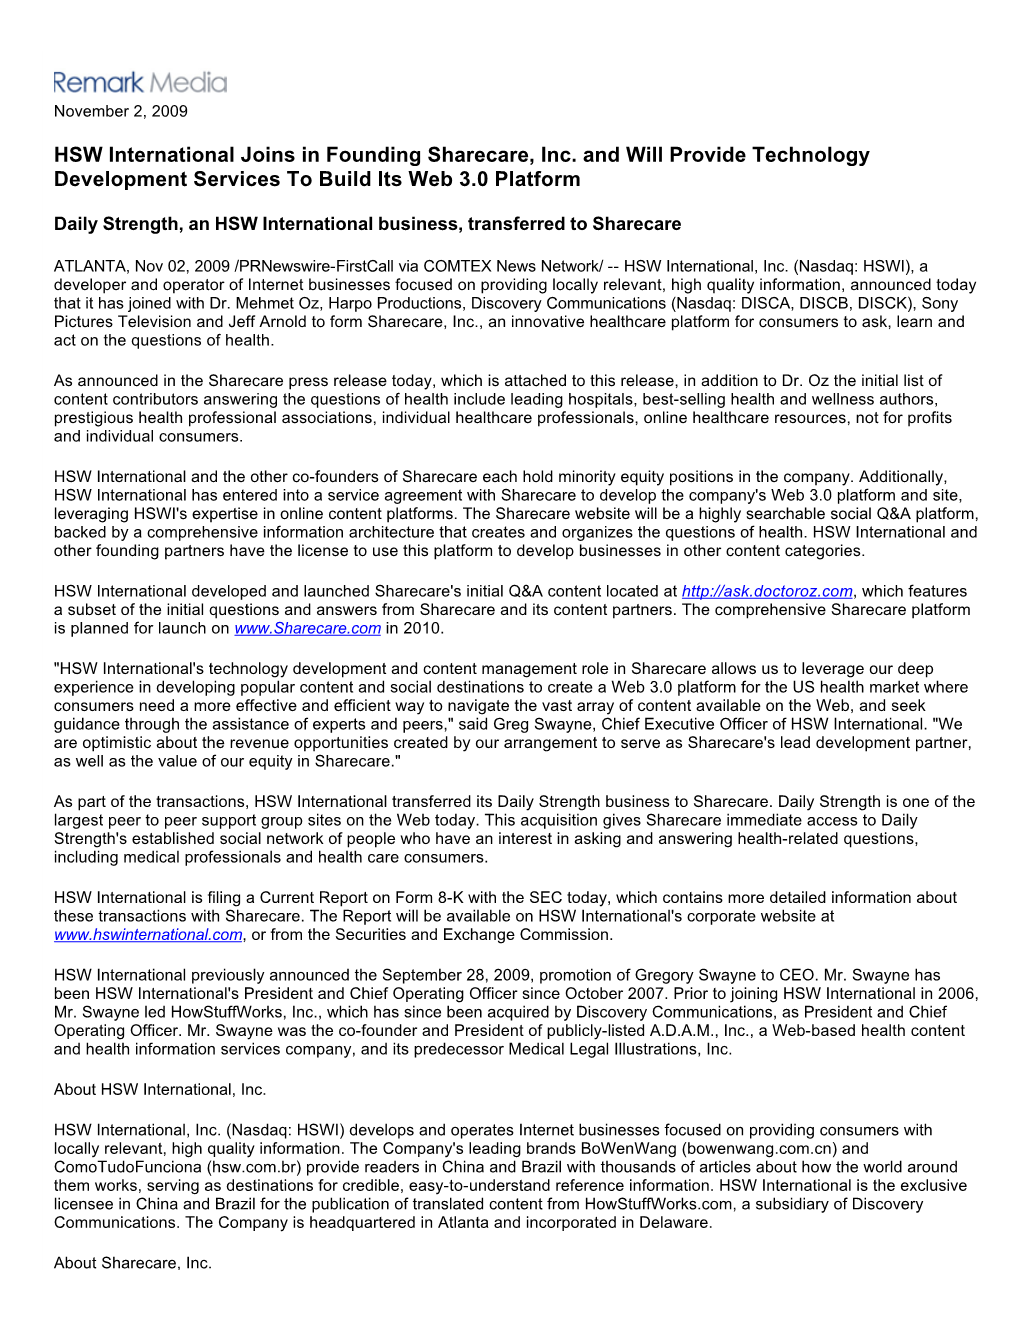 HSW International Joins in Founding Sharecare, Inc. and Will Provide Technology Development Services to Build Its Web 3.0 Platform